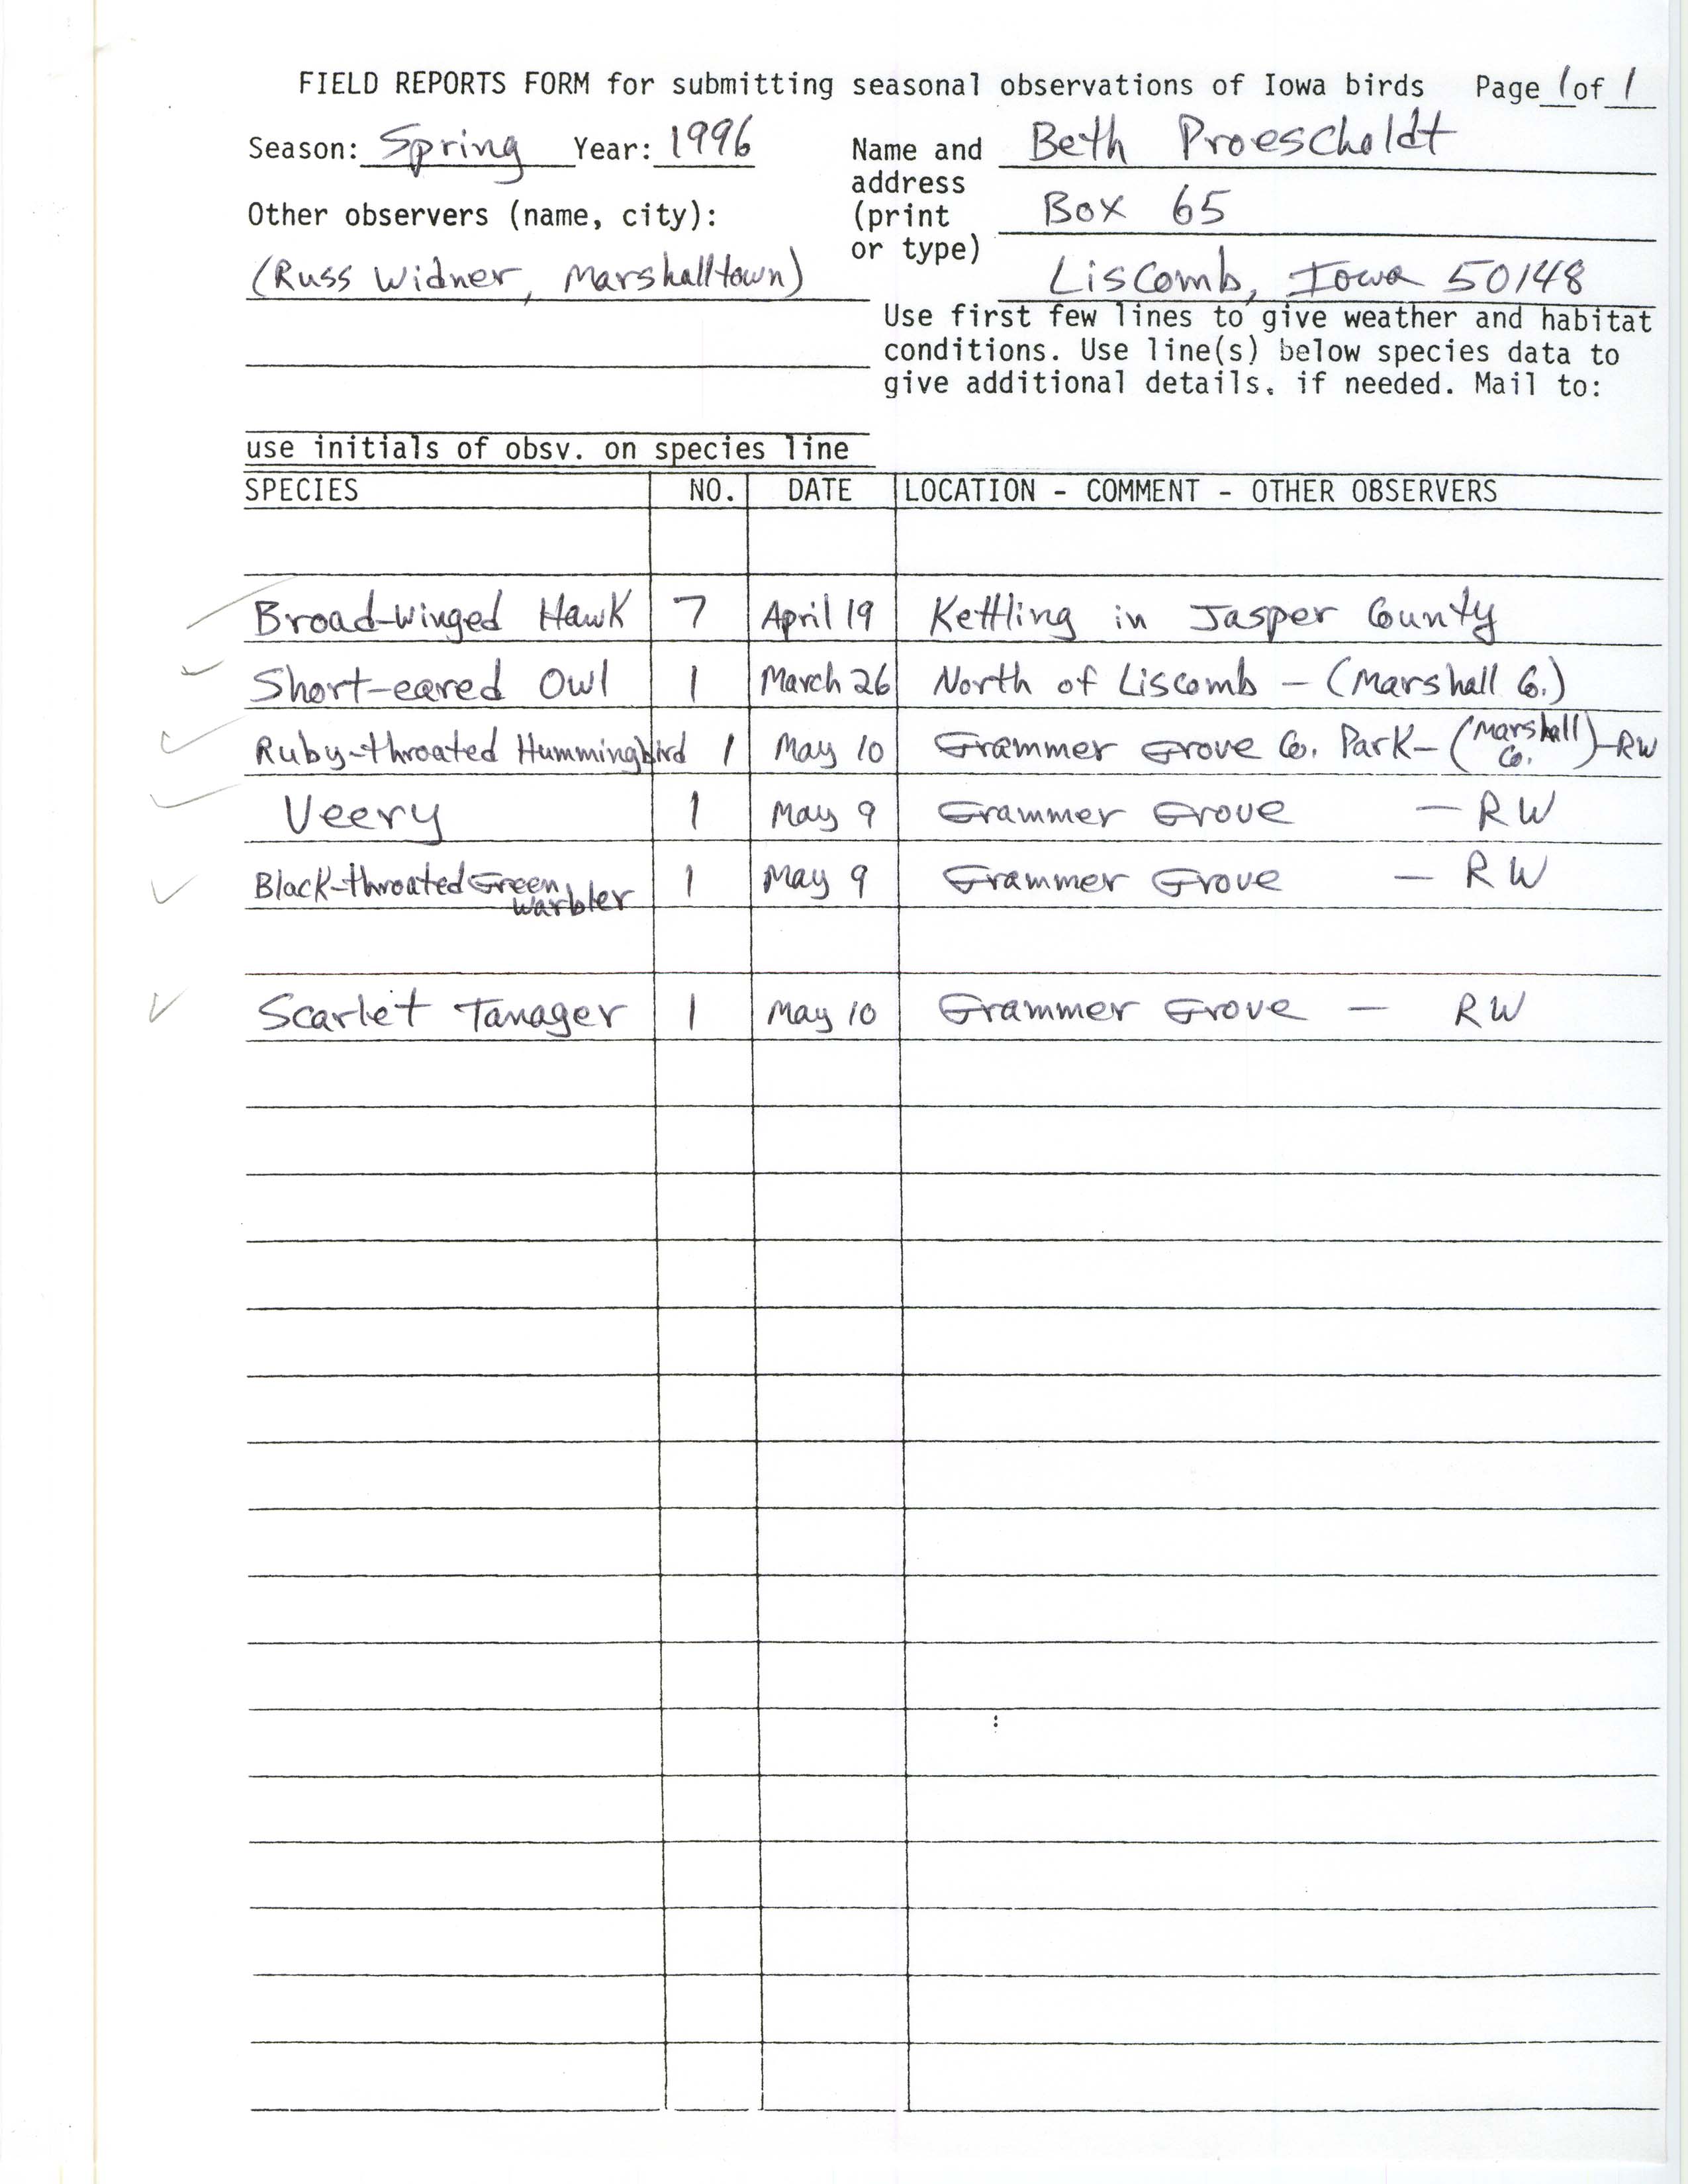 Field reports form for submitting seasonal observations of Iowa birds, Beth Proescholdt, spring 1996